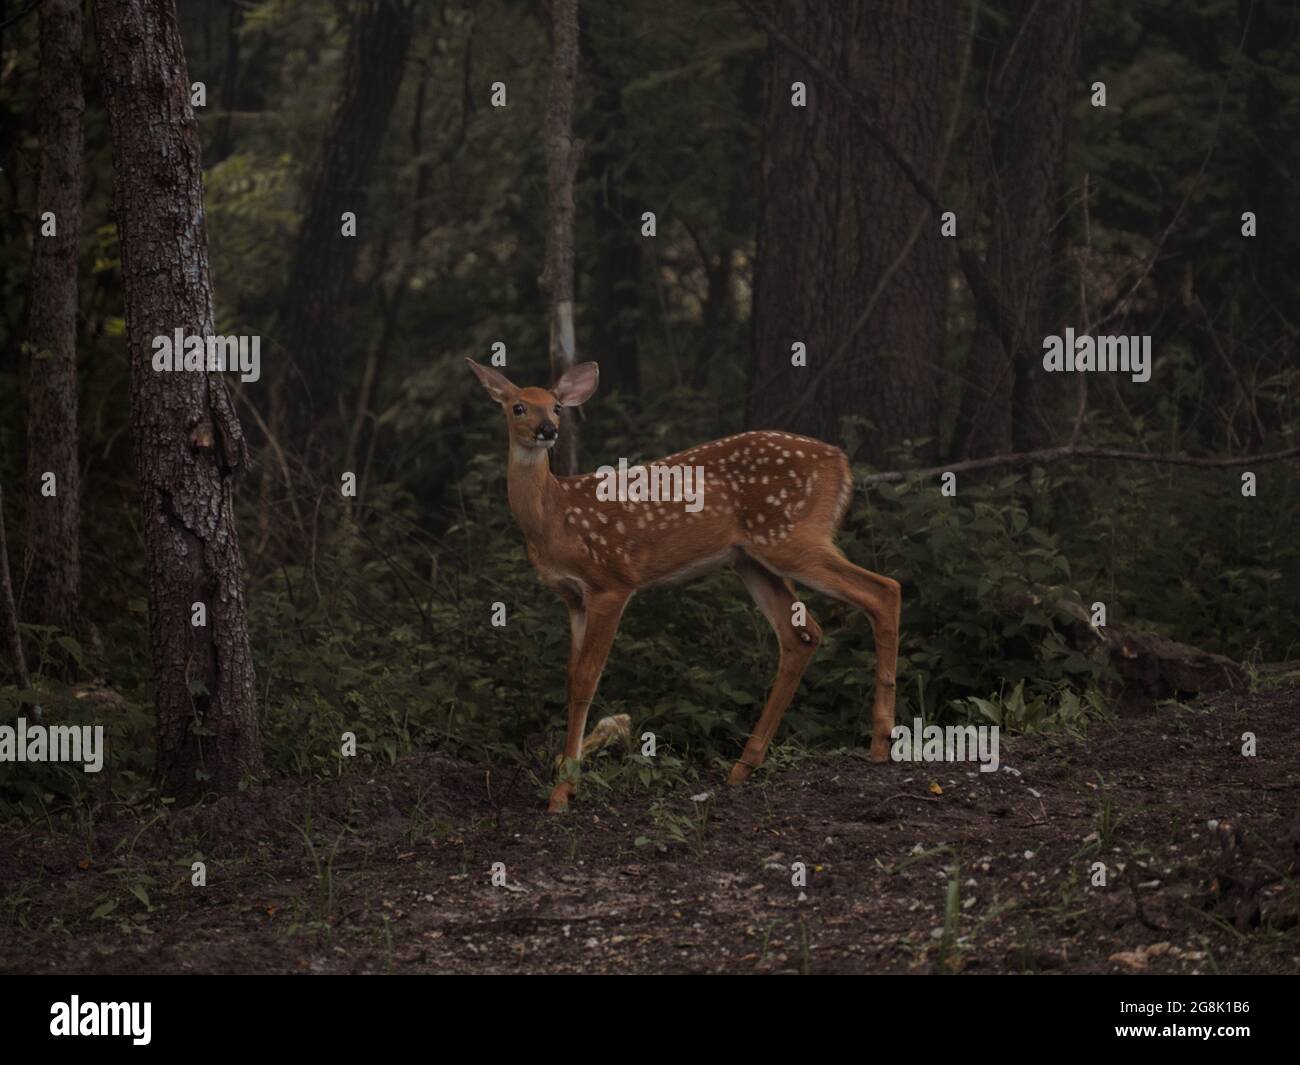 Young scared deer in a dark dense forest Stock Photo